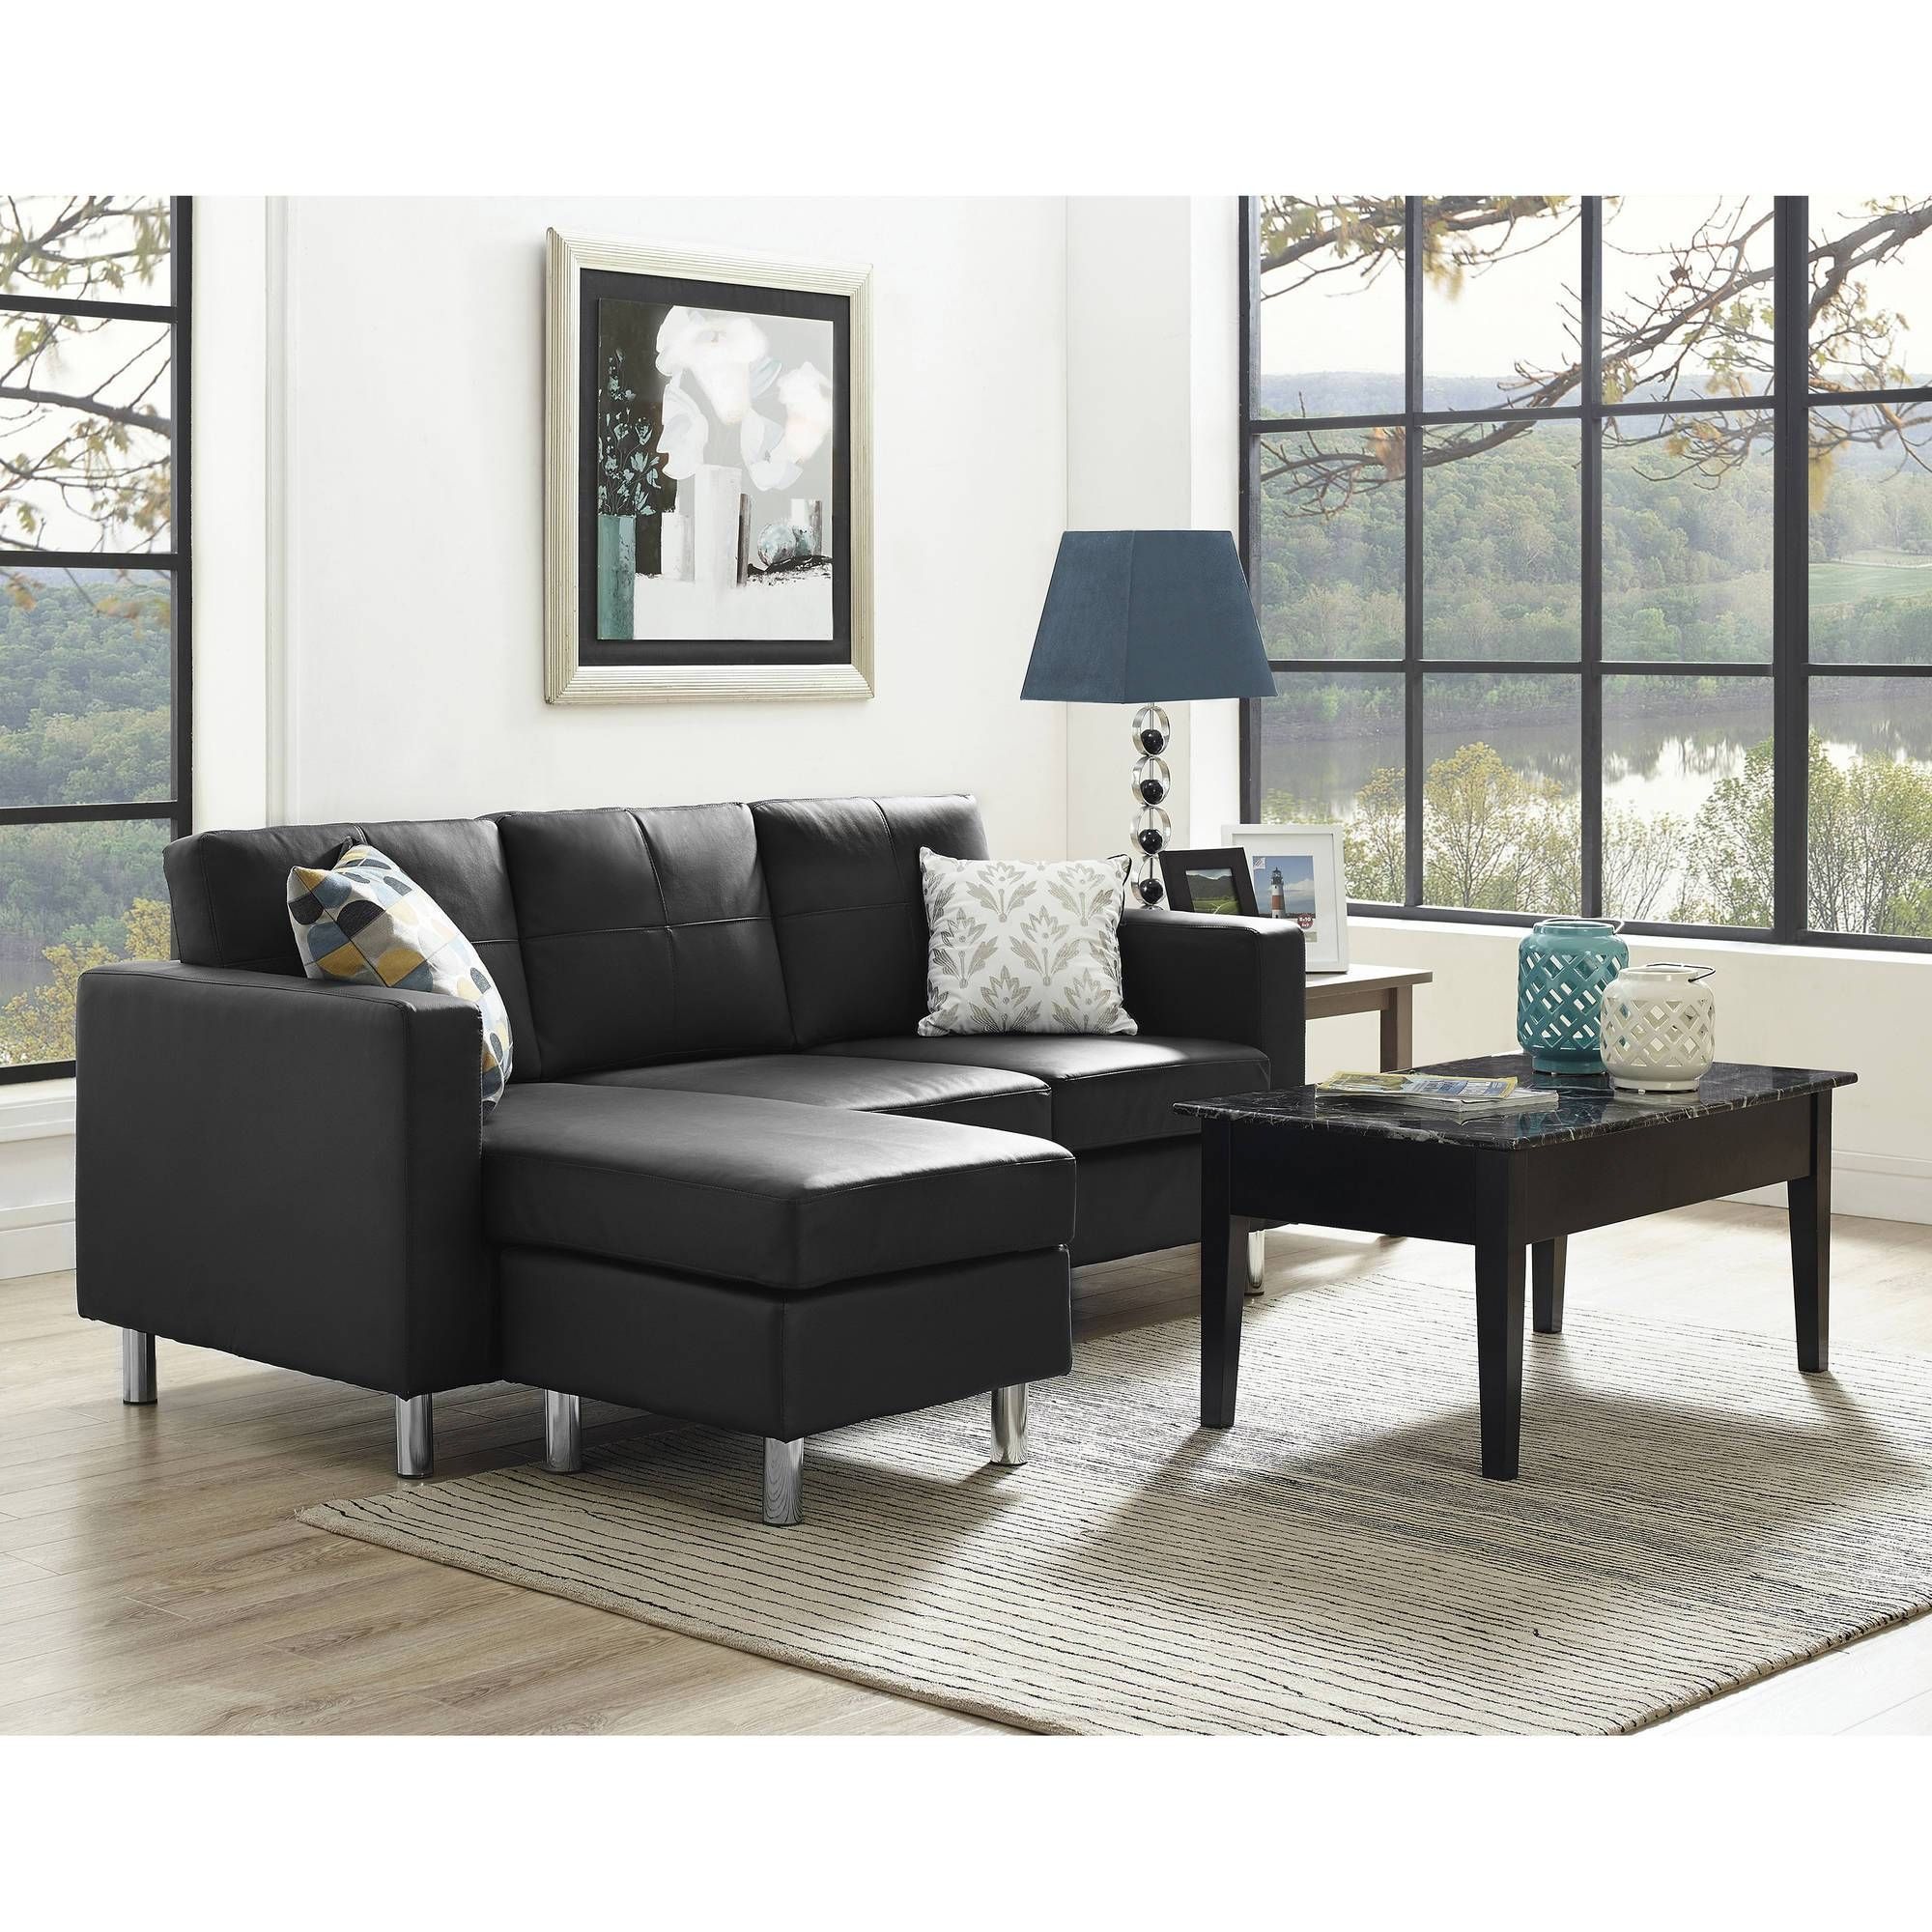 Dorel Living Small Spaces Configurable Sectional Sofa, Multiple Pertaining To Sectinal Sofas (View 21 of 30)